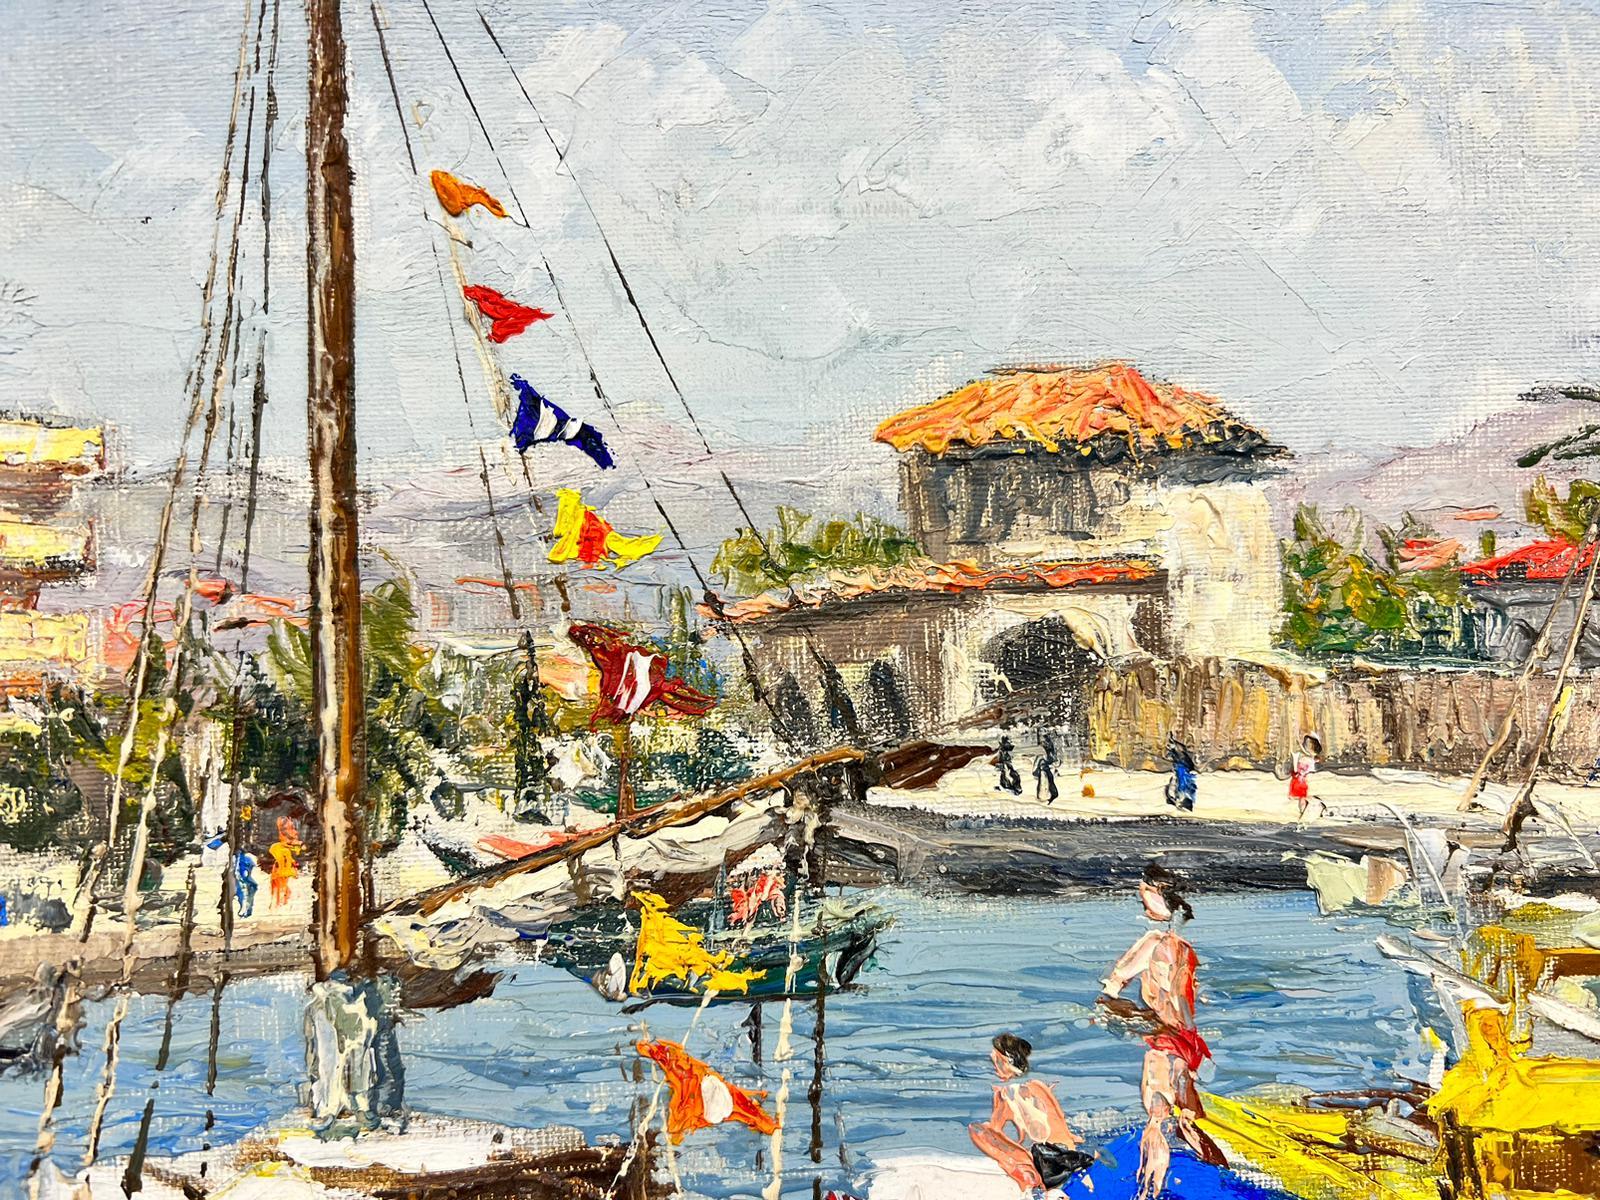 Boat Landscape
by Josine Vignon (French 1922-2022)
signed and stamped verso
oil painting on board, unframed
board: 9.5 x 13 inches

Colors: Blue colors, brown, grey, white, yellow, orange, green and black

Very good condition

Provenance: from the